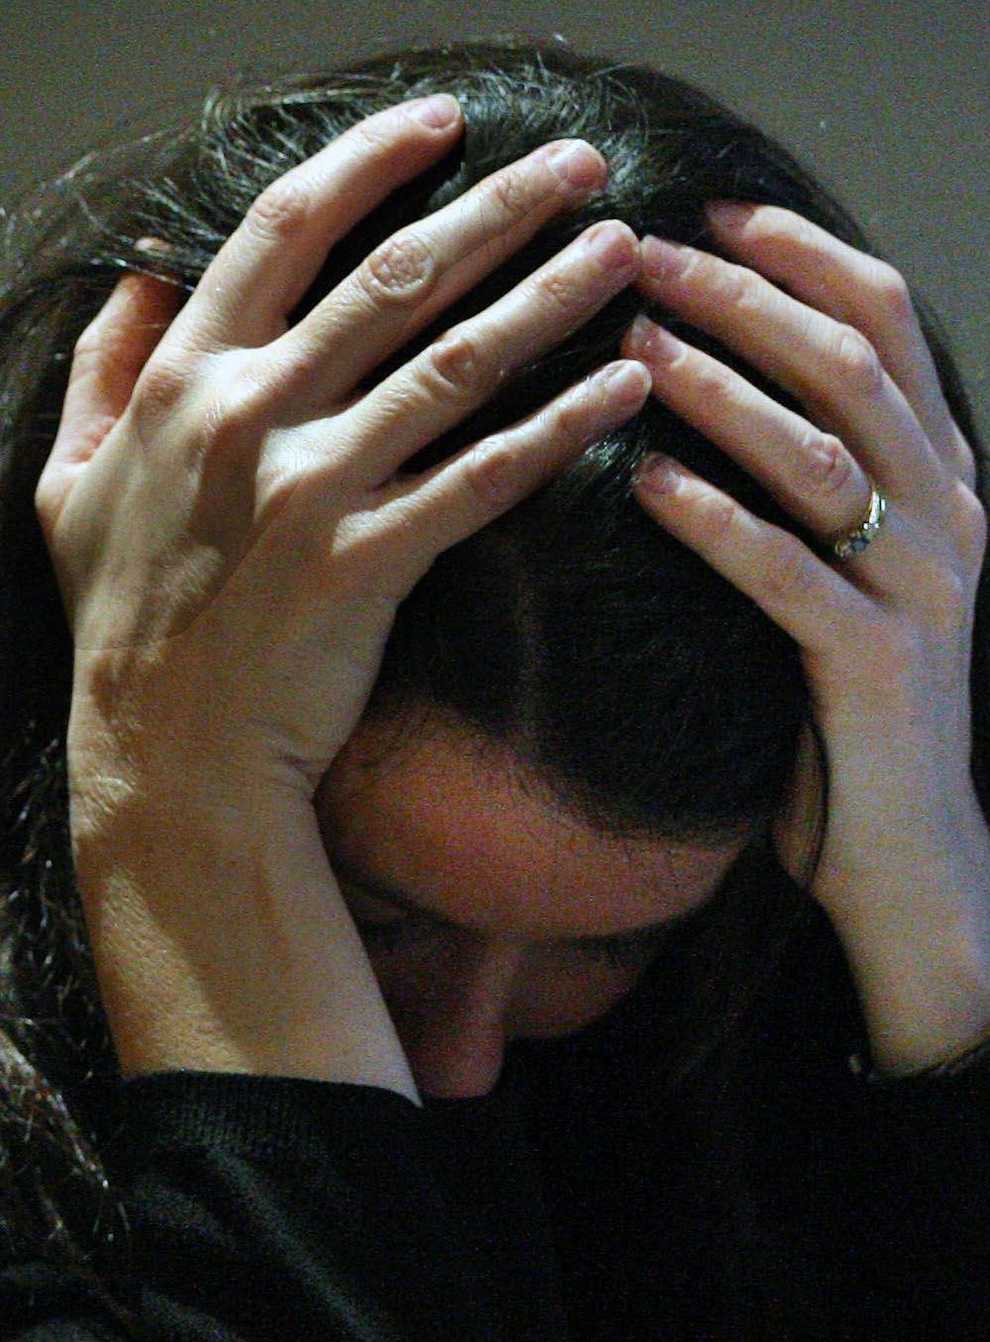 New figures show a rise in the number of young people seeking help from the NHS for poor mental health (David Cheskin/PA)